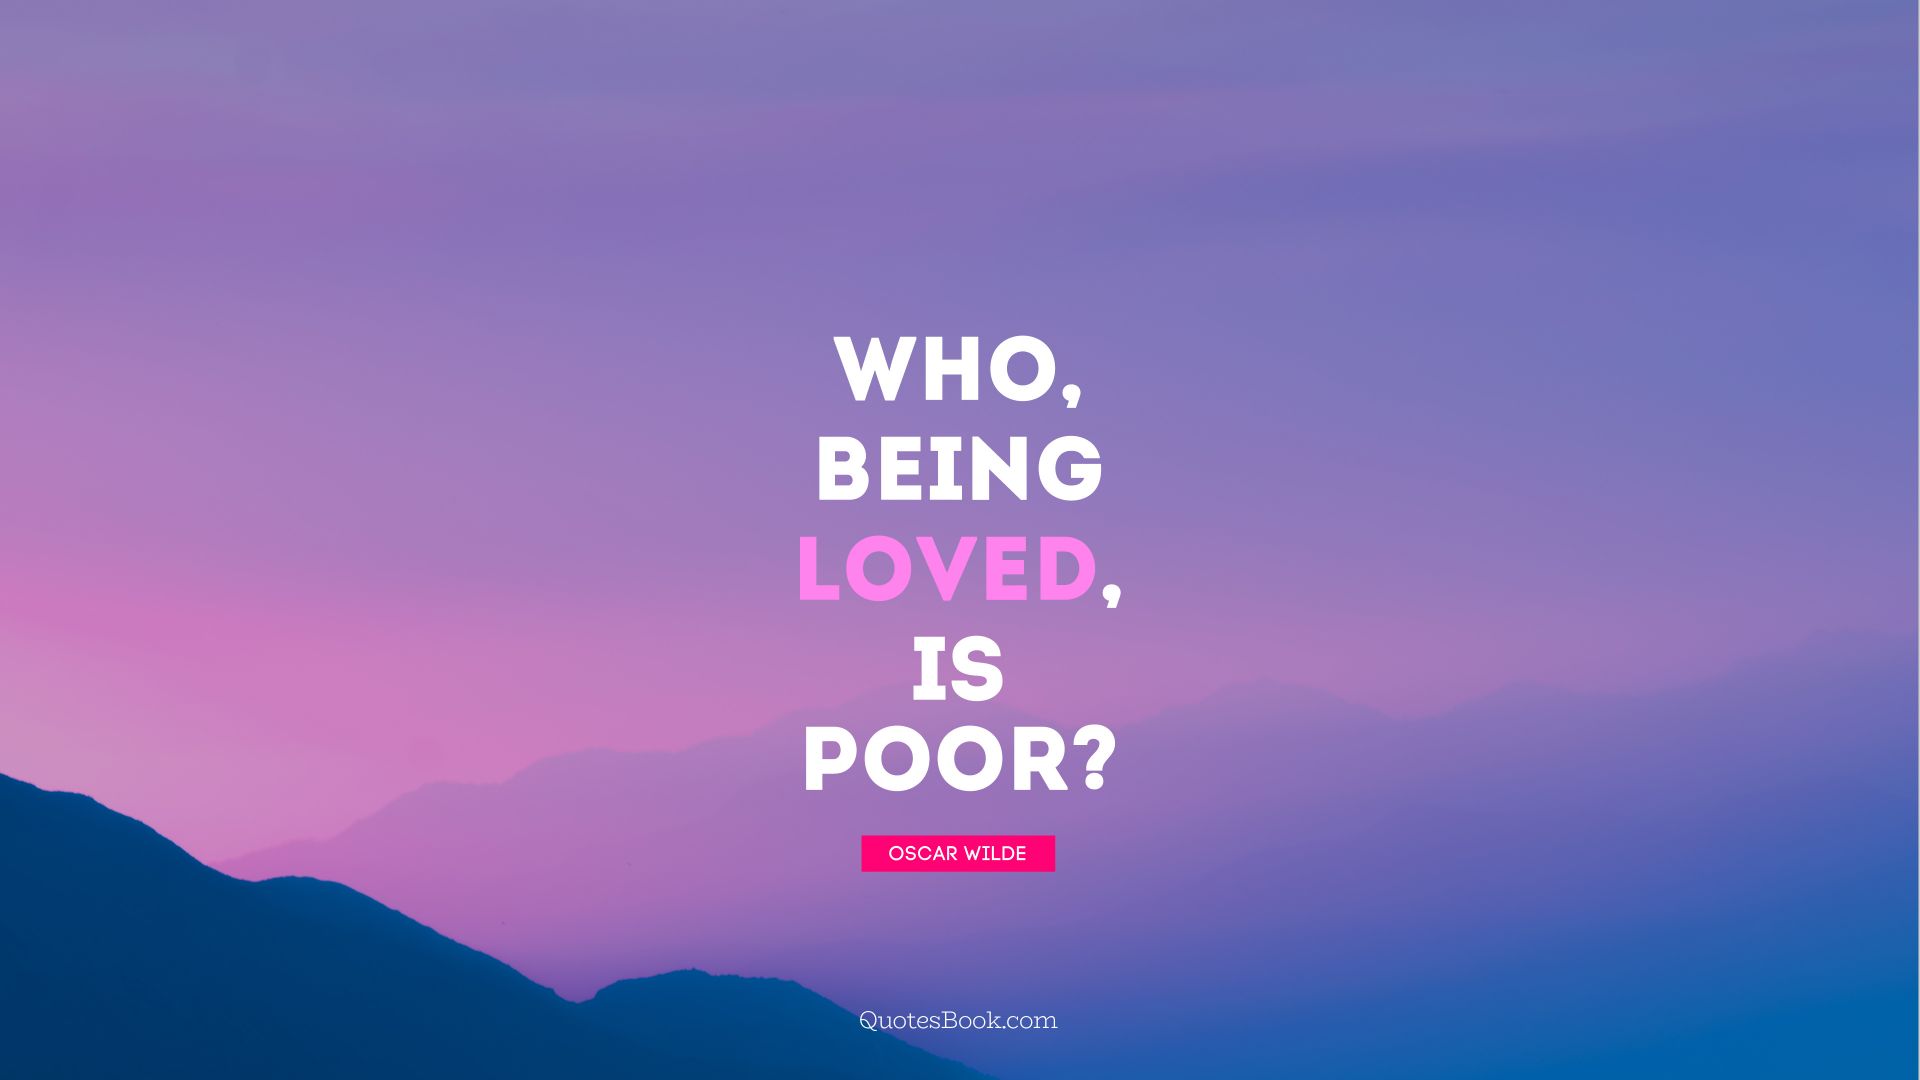 Who, being loved, is poor. - Quote by Oscar Wilde